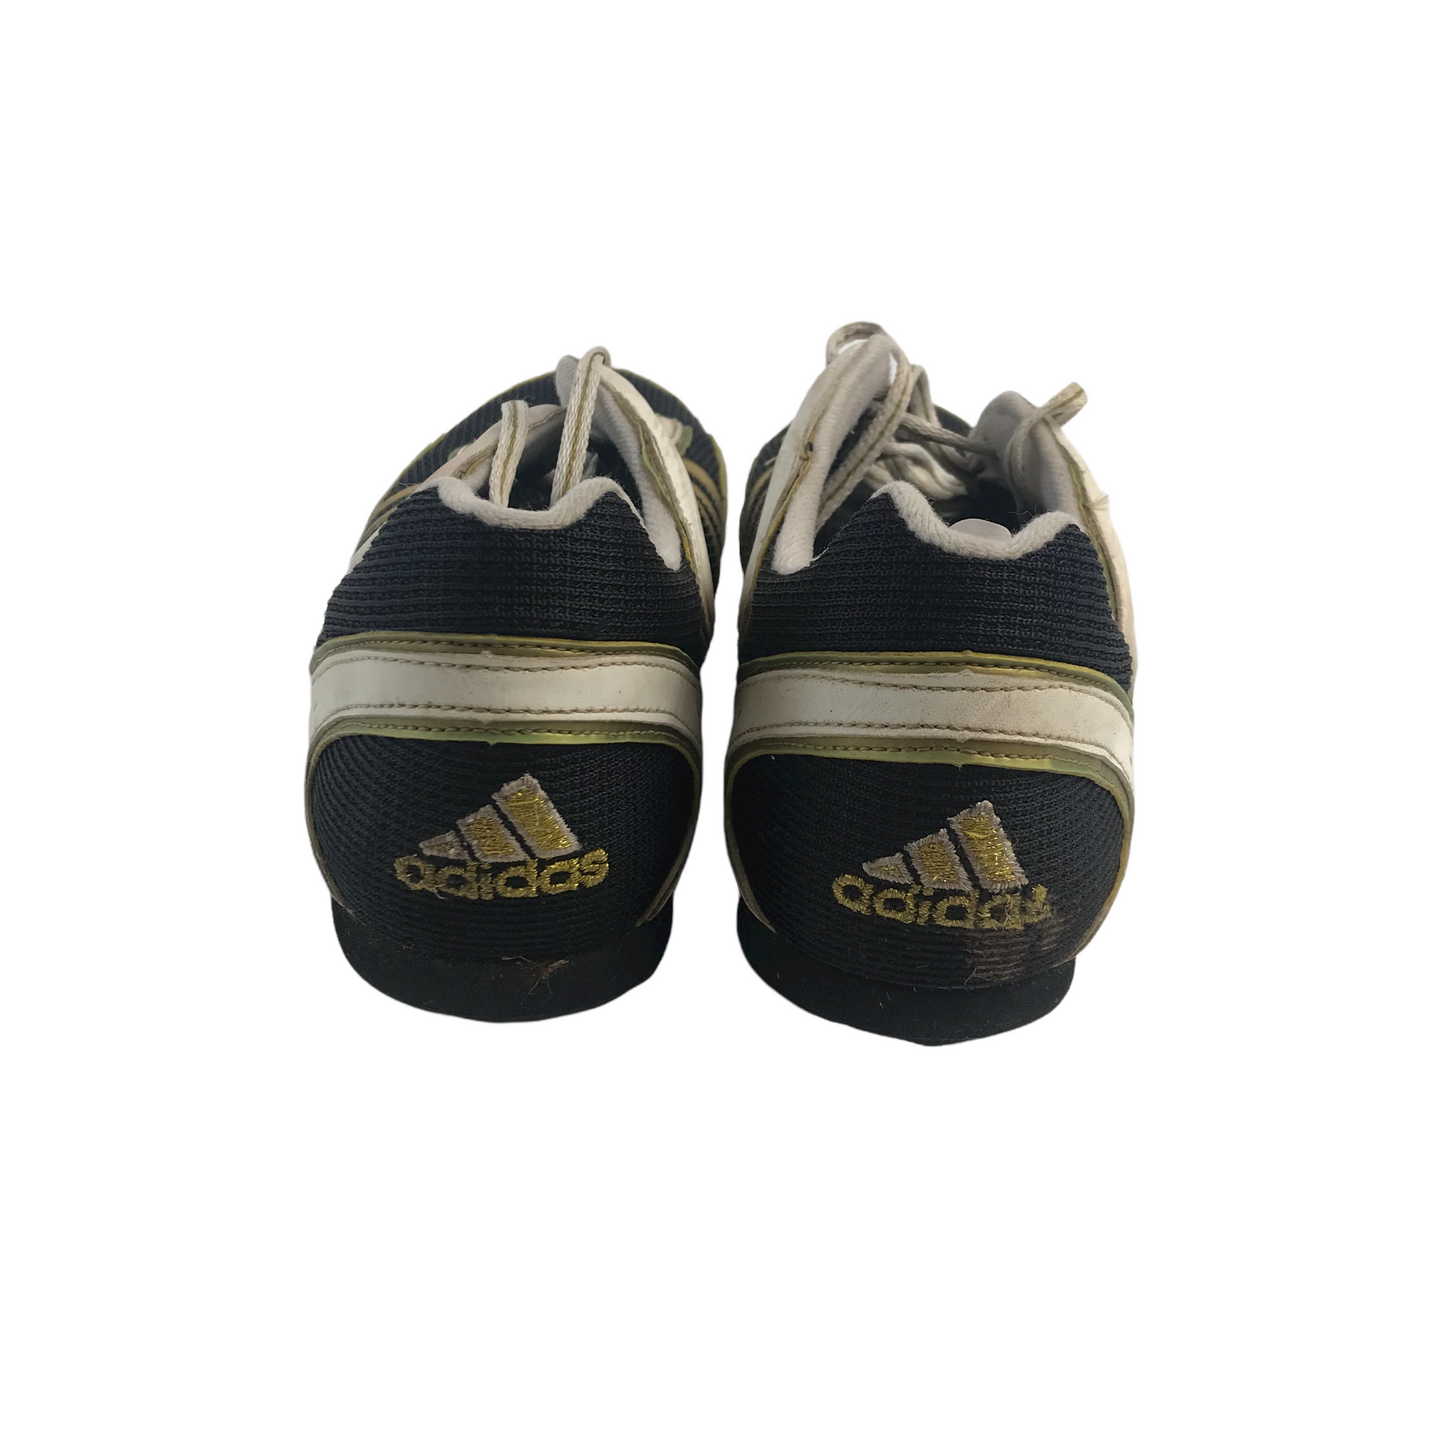 Adidas Black Gold and White Track and Field Spikes Trainers Shoe Size 9.5